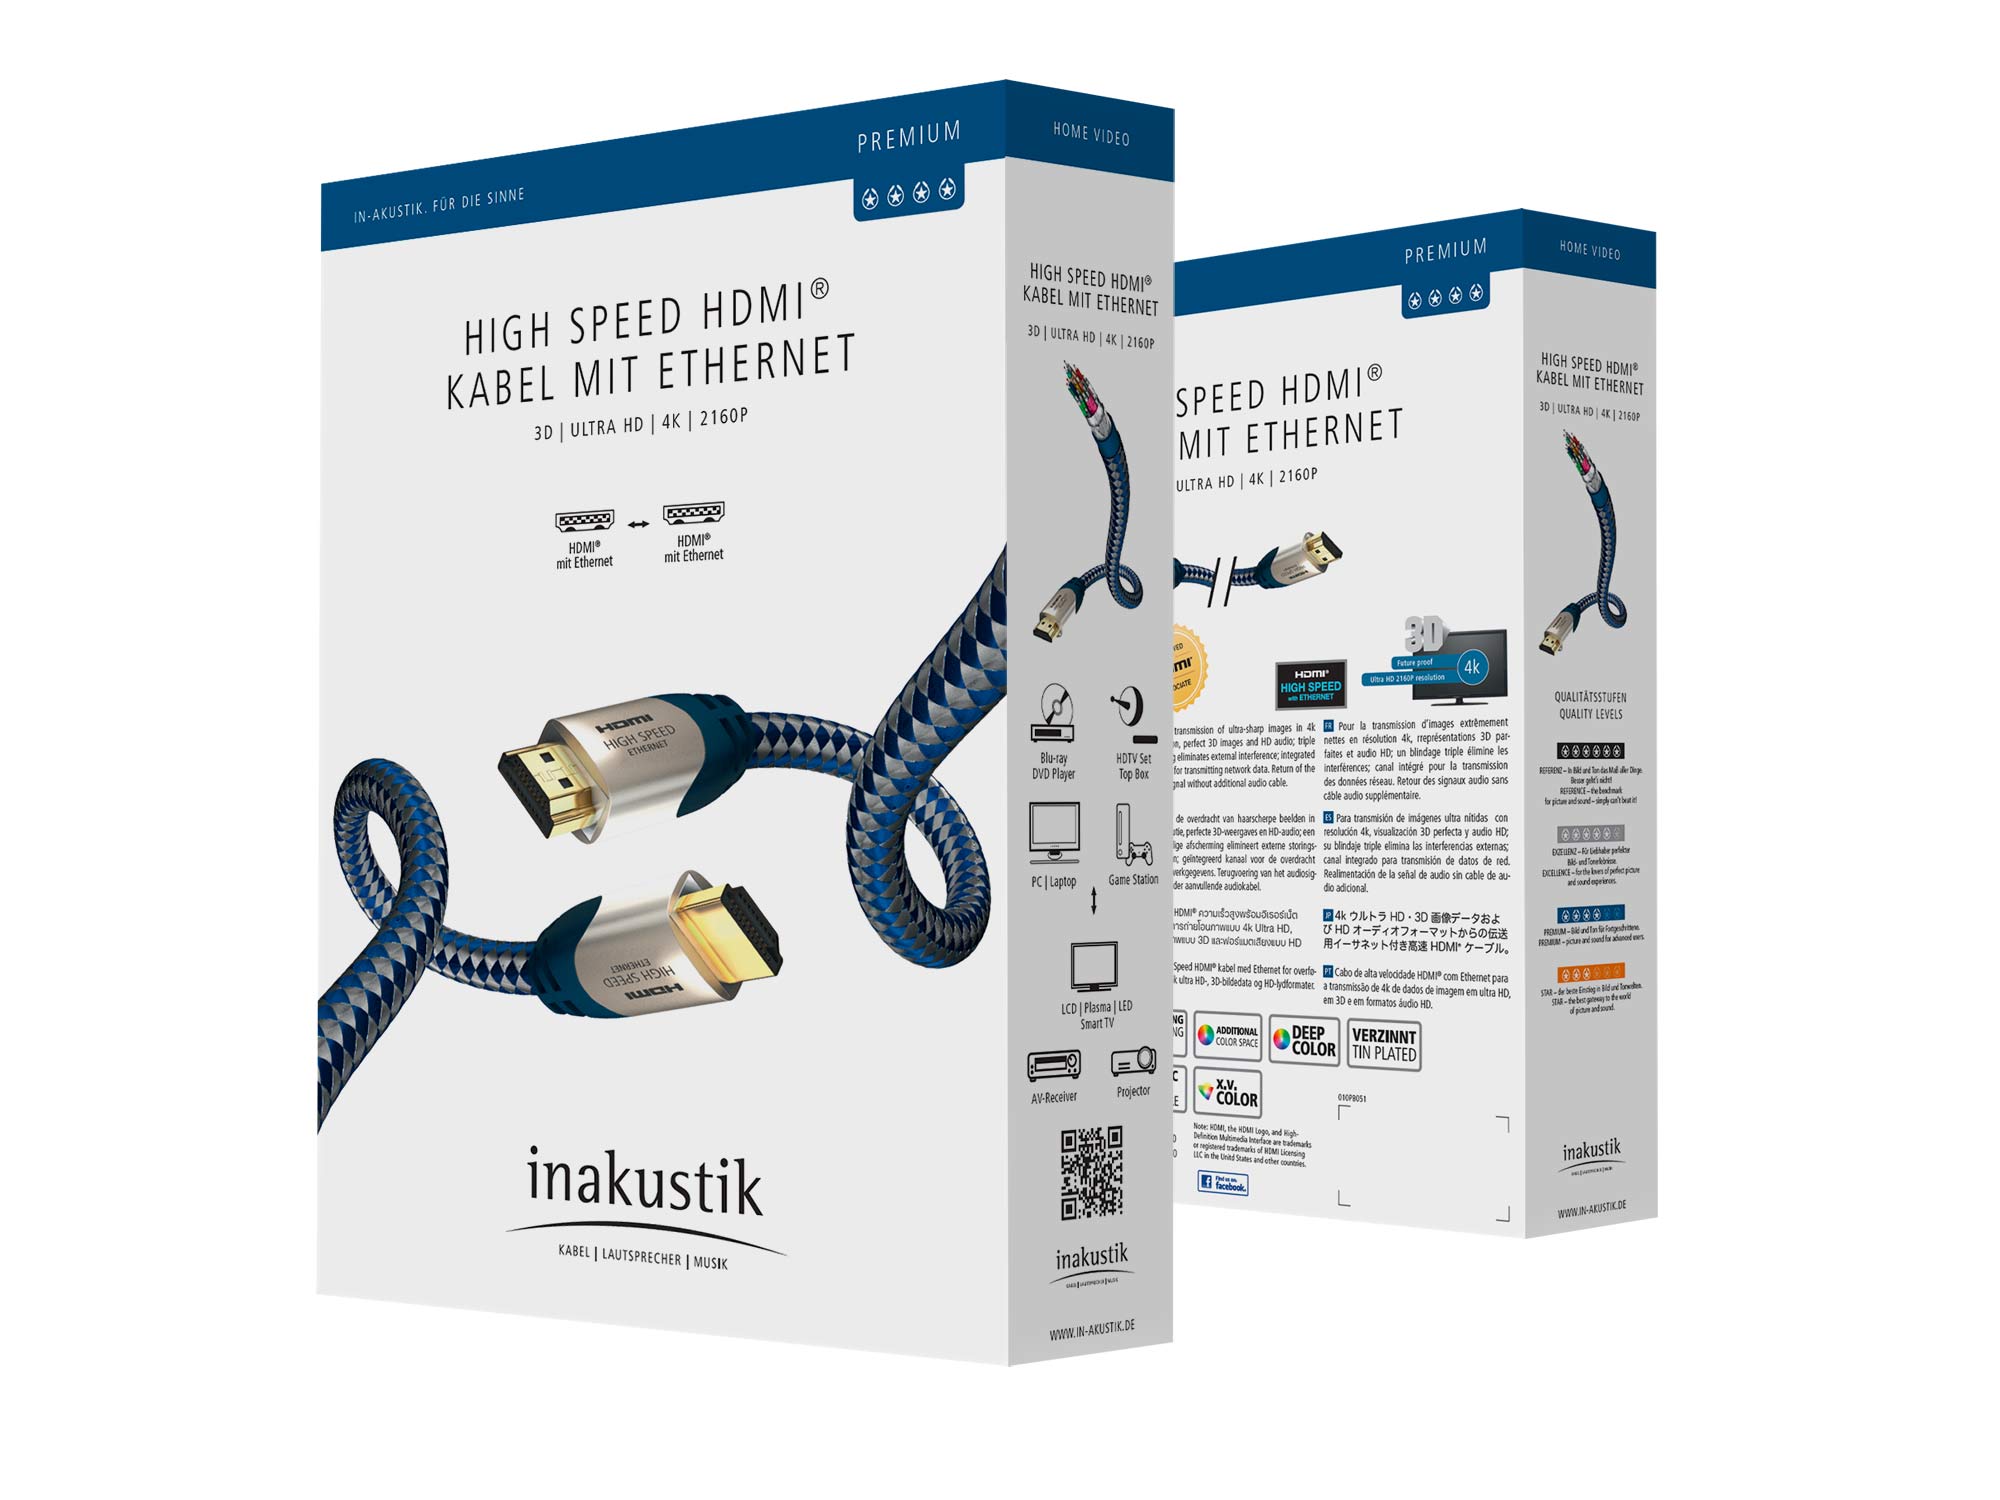 INAKUSTIK Premium 5m HIGH SPEED HDMI CABLE WITH ETHERNET